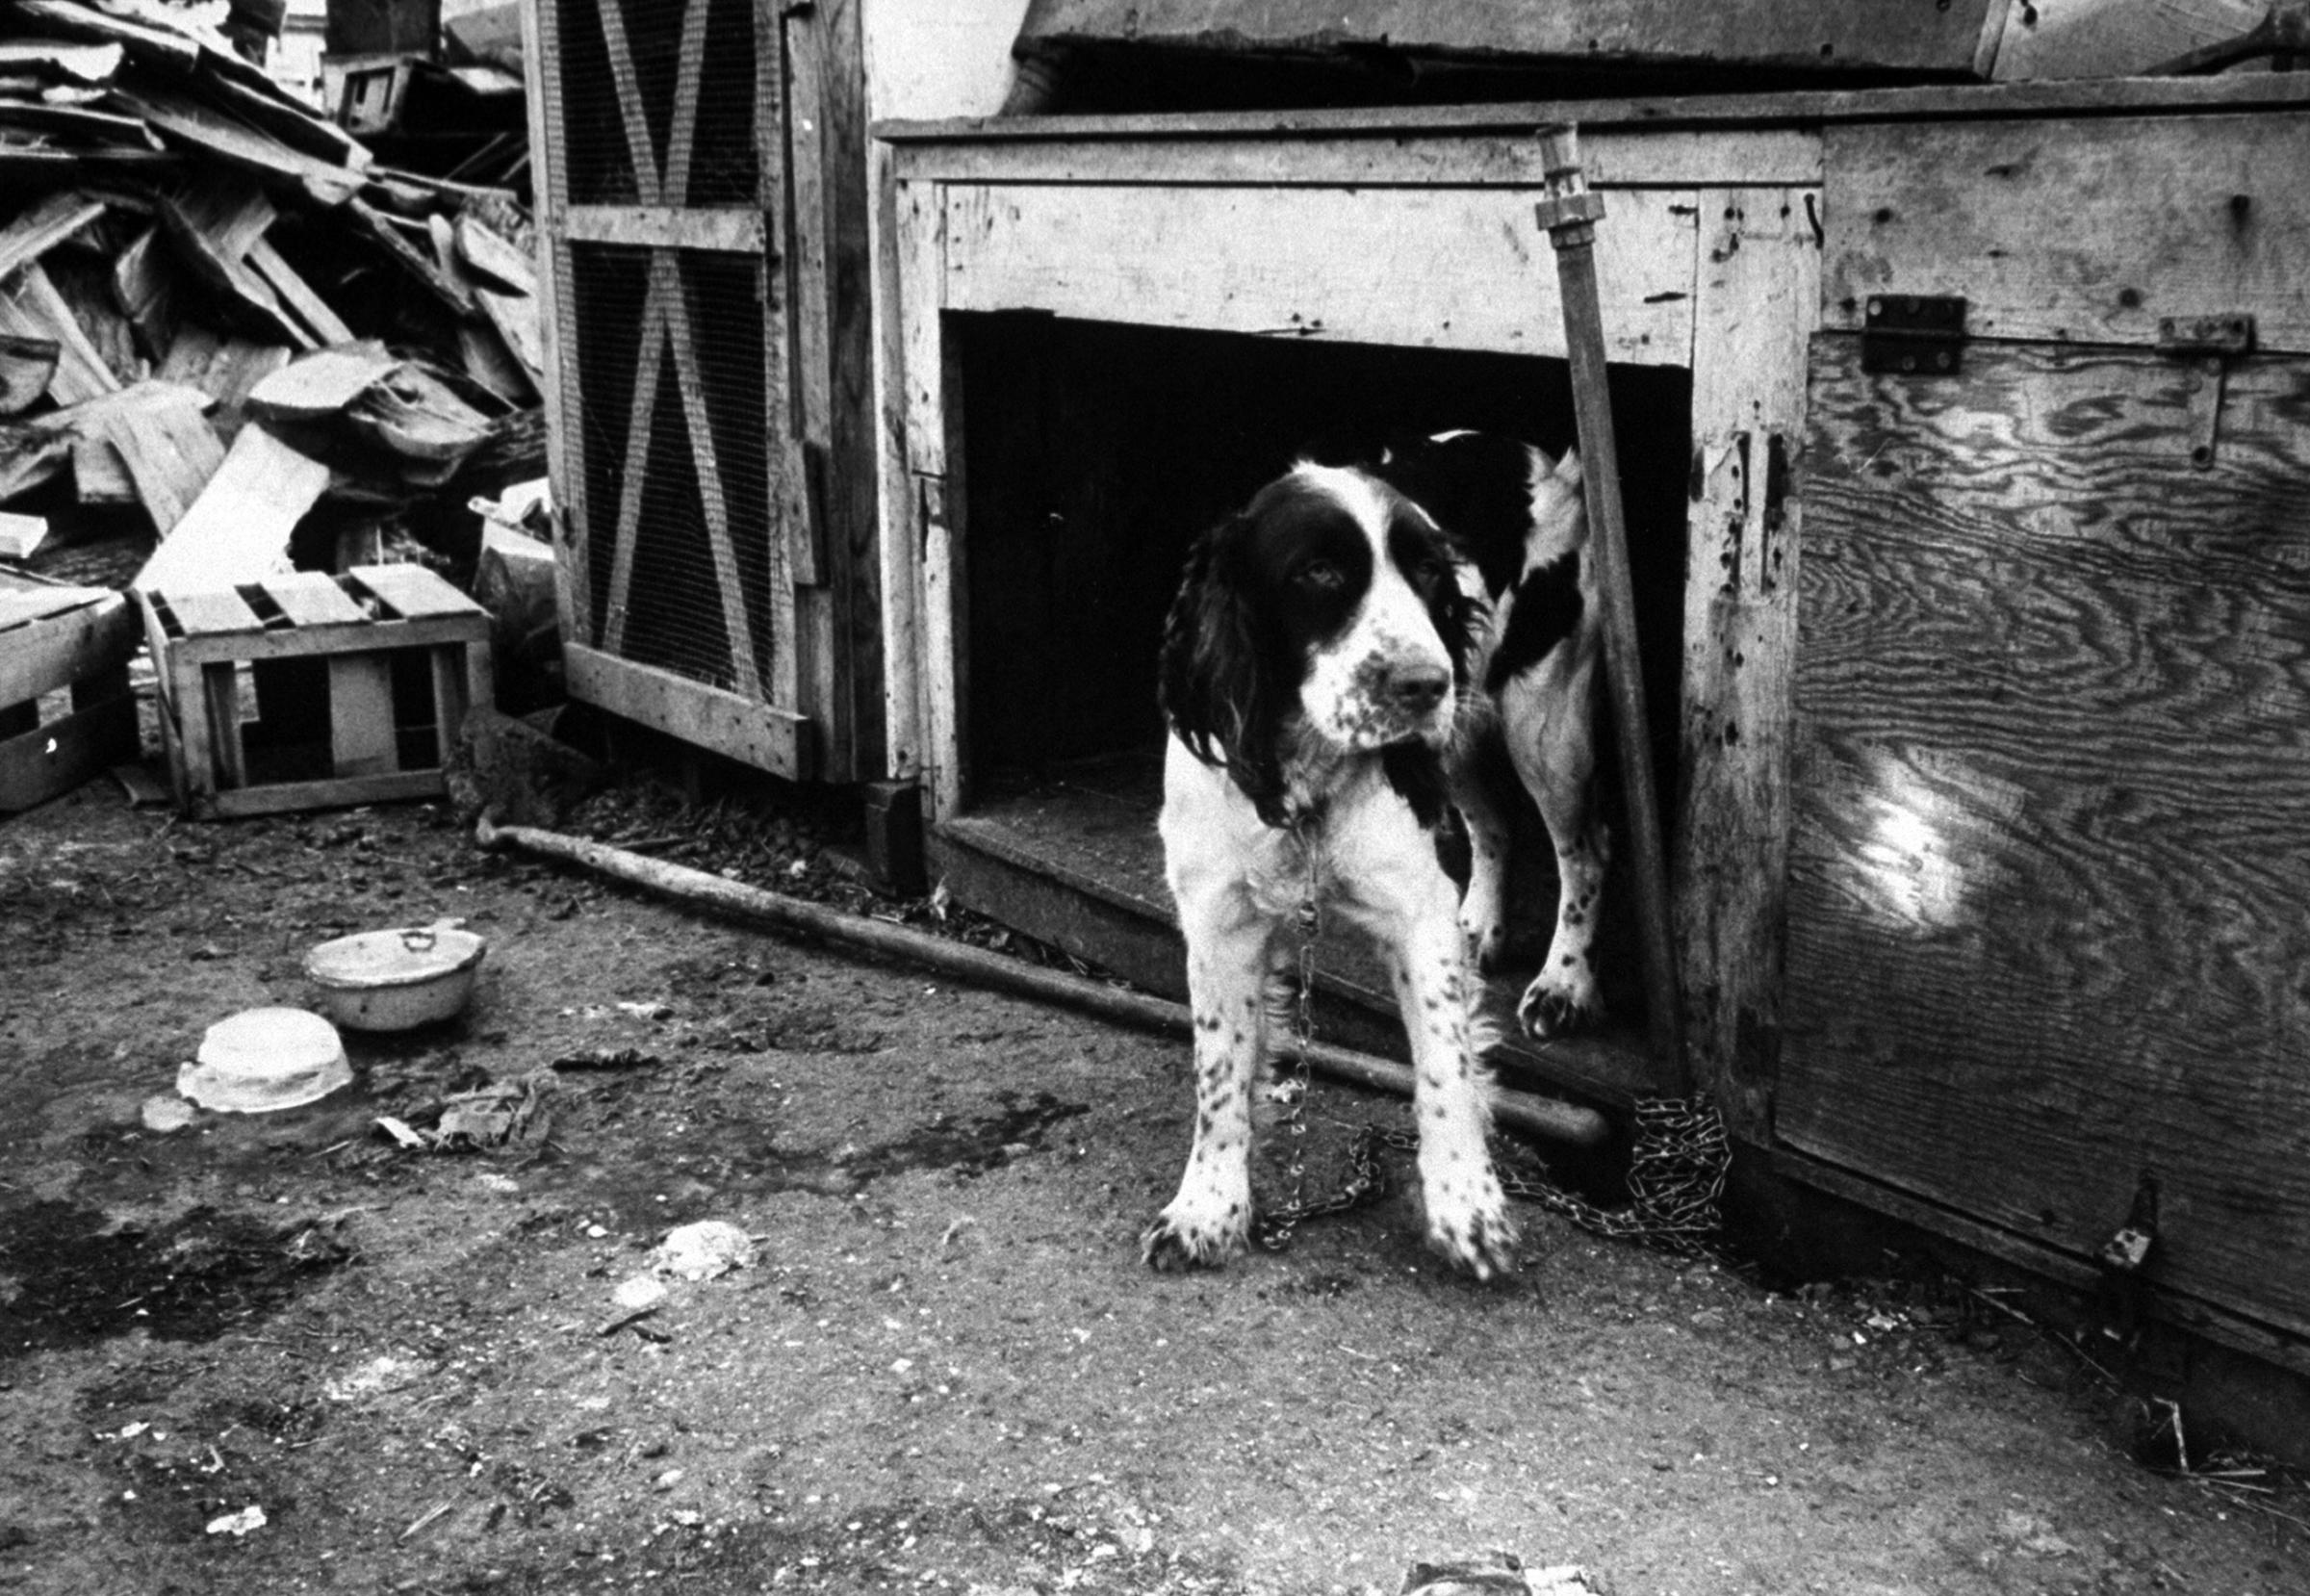 This woebegone springer spaniel was one of only a handful of dogs in [dog dealer Lester] Brown's inventory of over 100 animals that appeared to be fit. Obviously he had just got there.